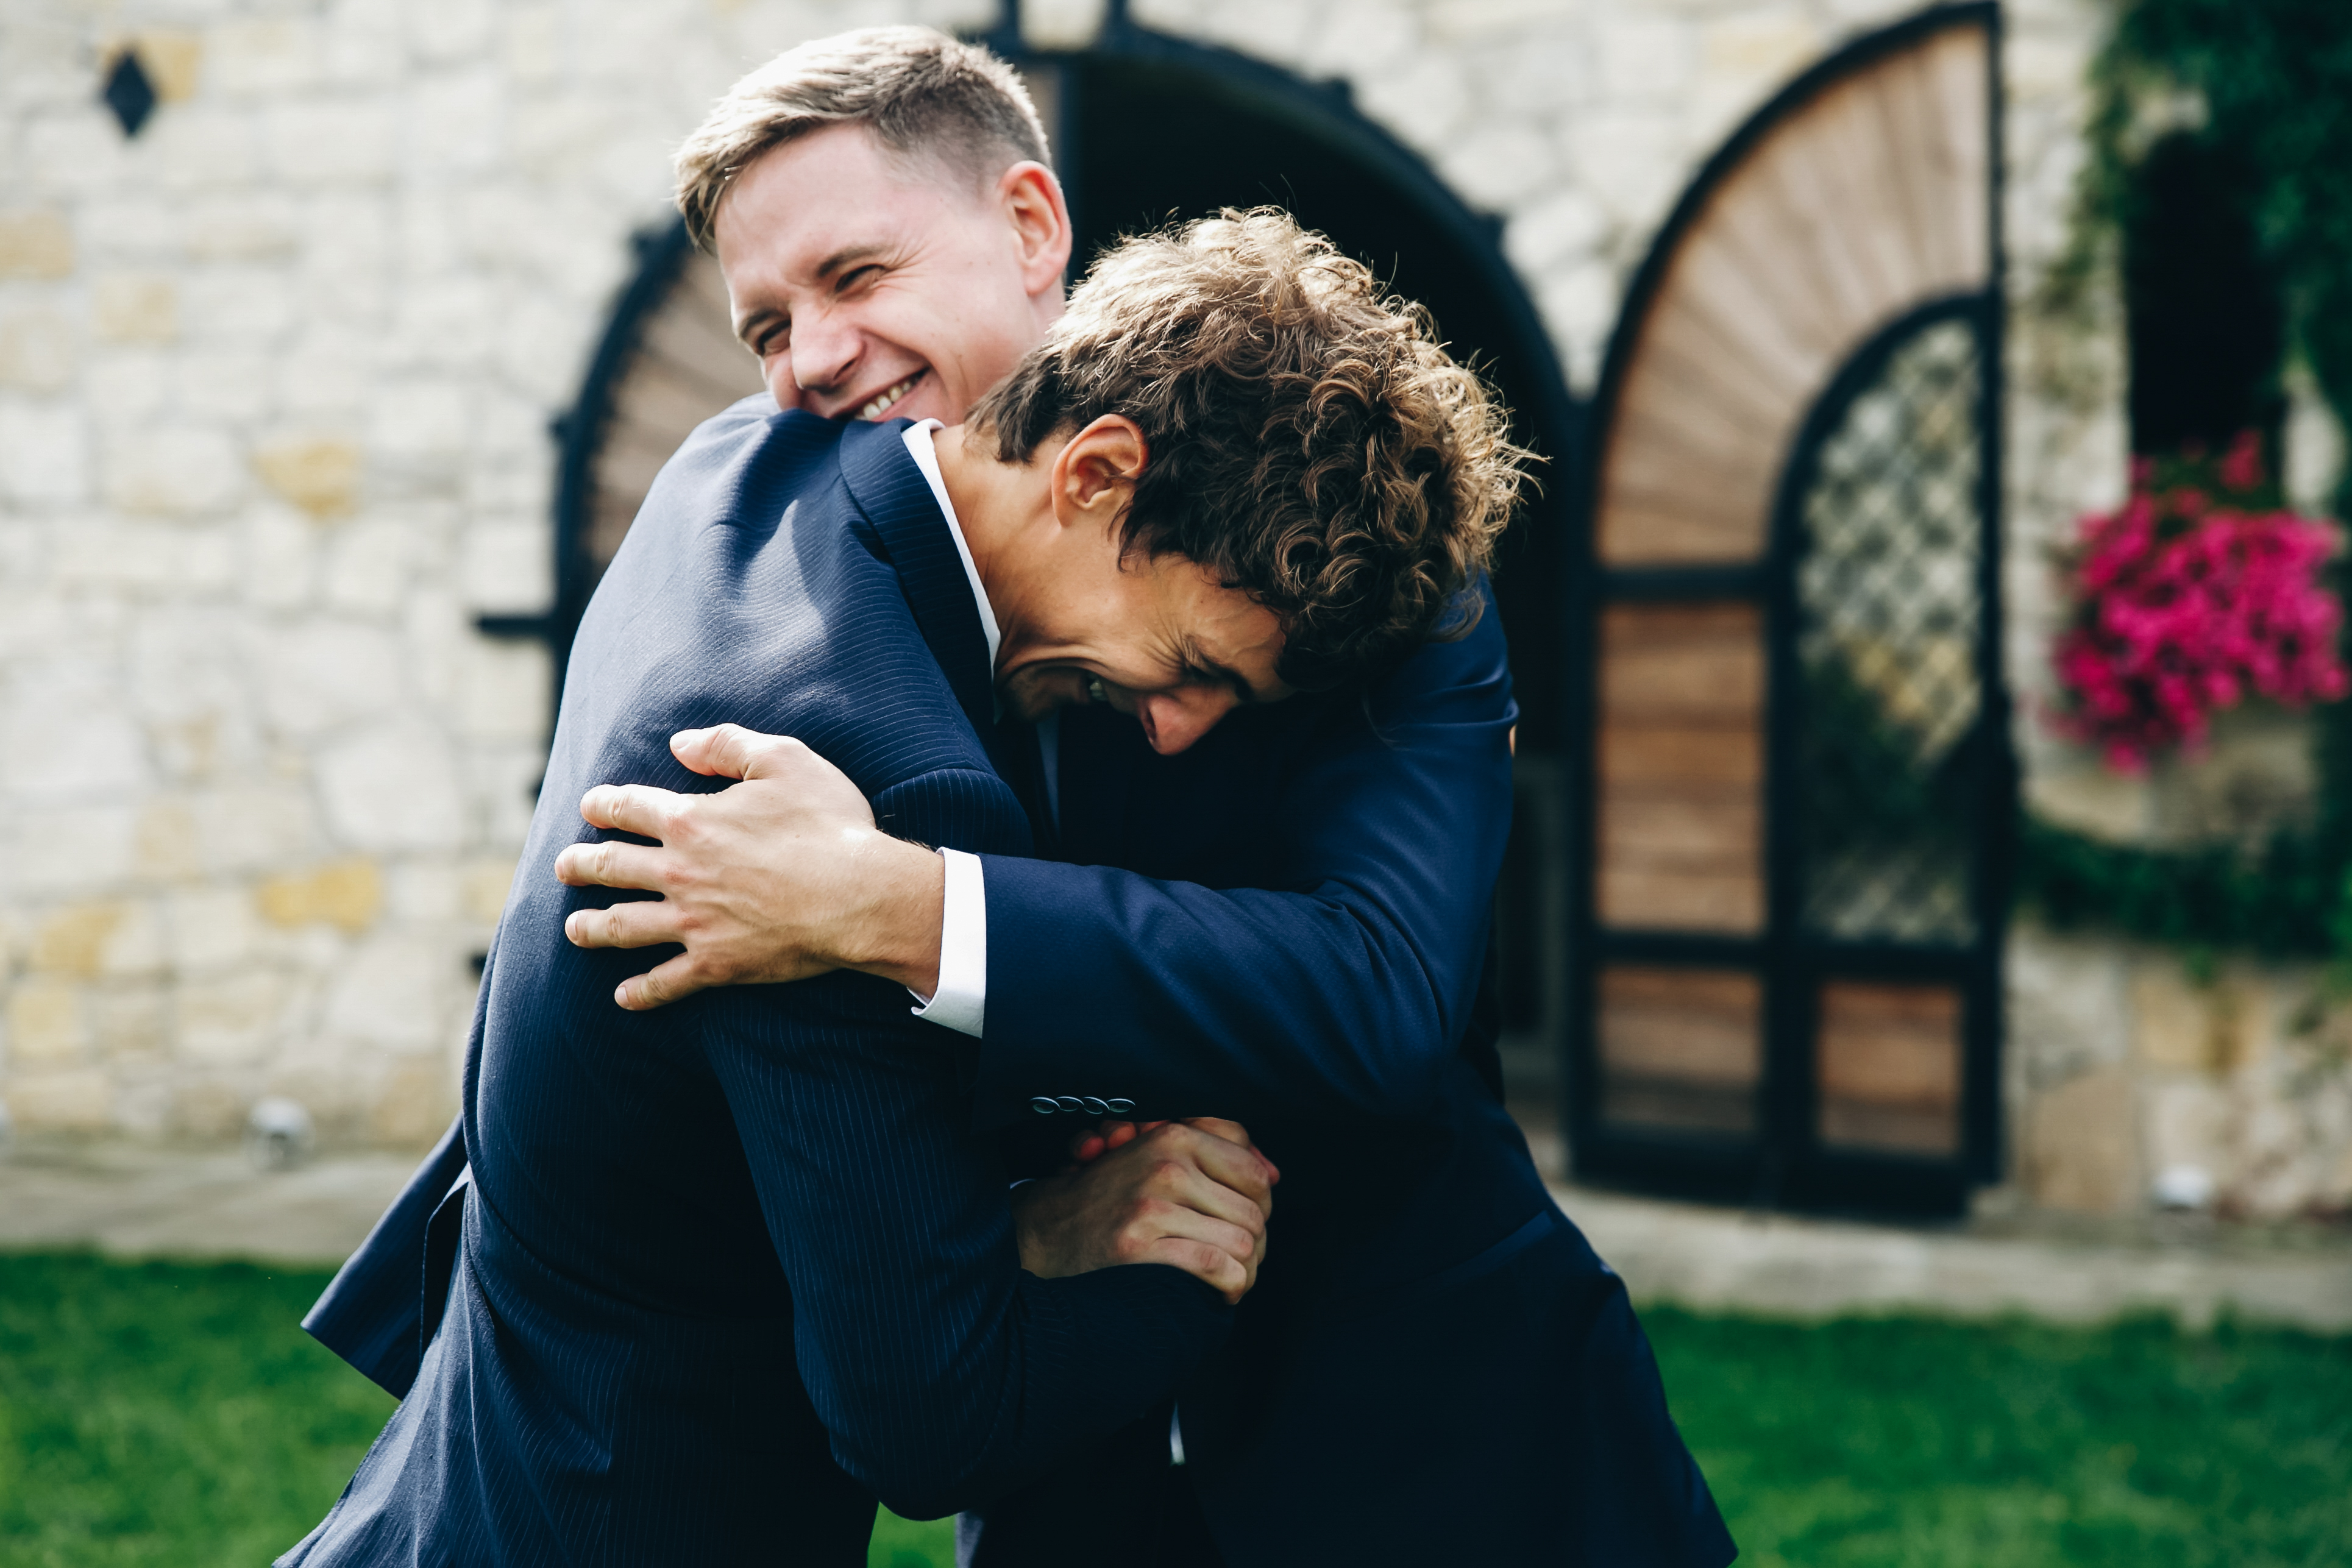 A groom and his best man | Source: Shutterstock